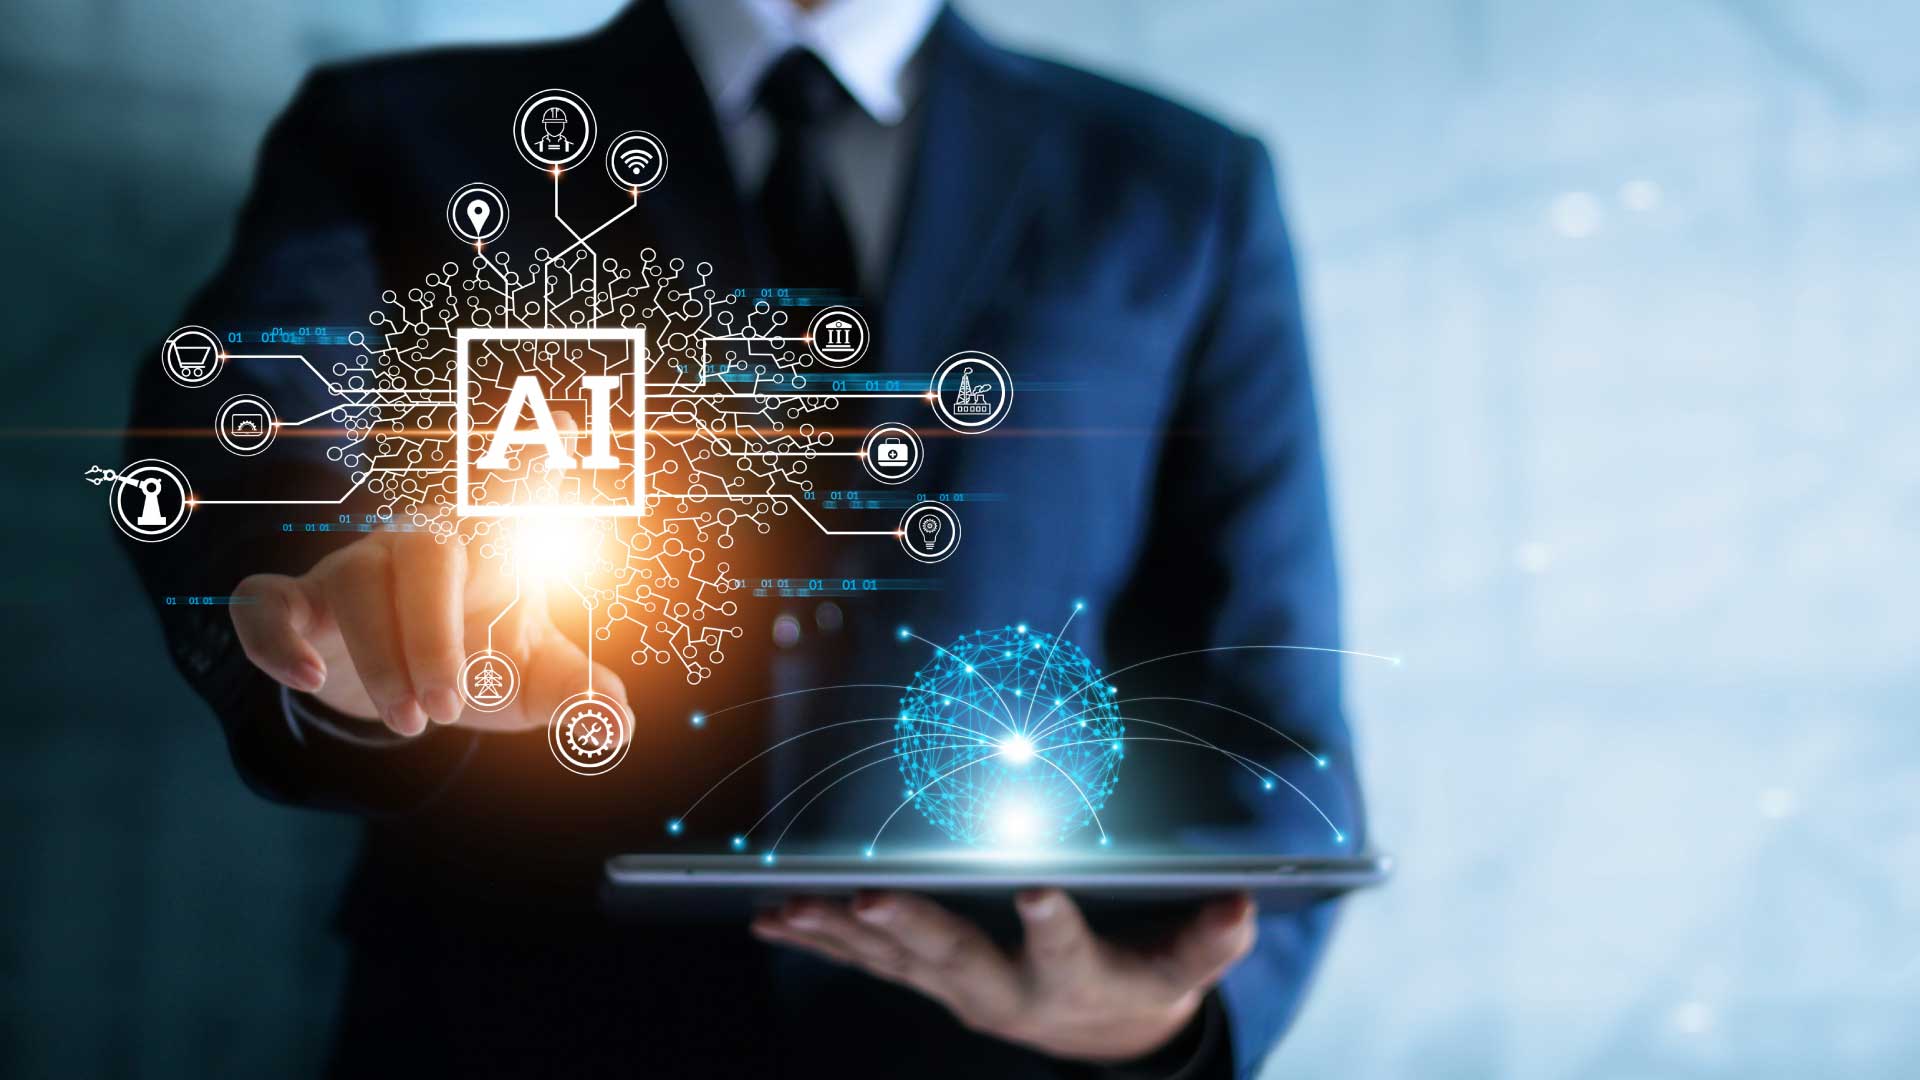 Abstract image of man pointing at screen with AI at his fingertips.